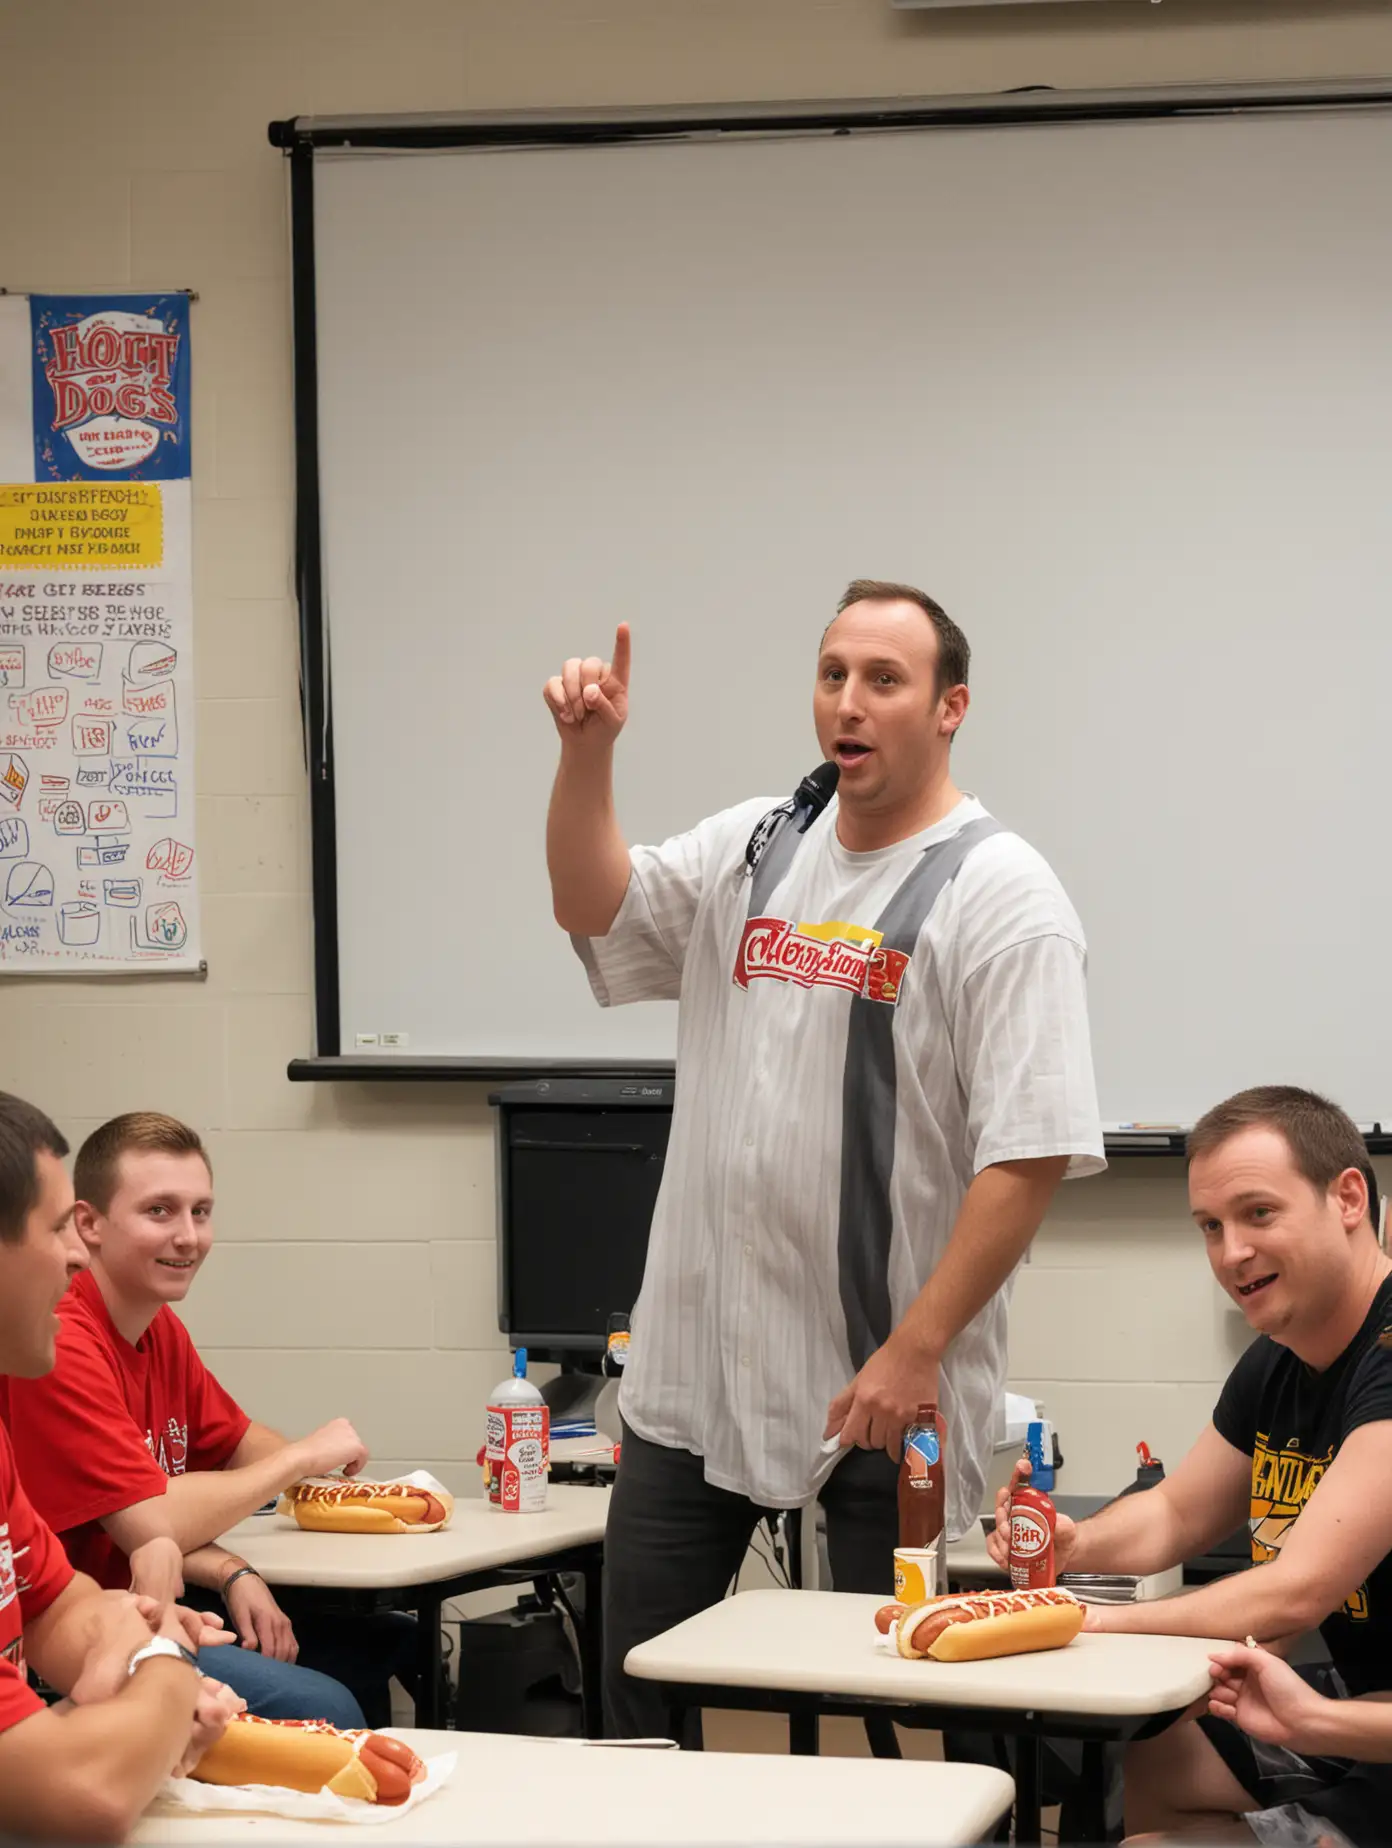 Joey Chestnut Presenting Hot Dog Techniques in Classroom Setting